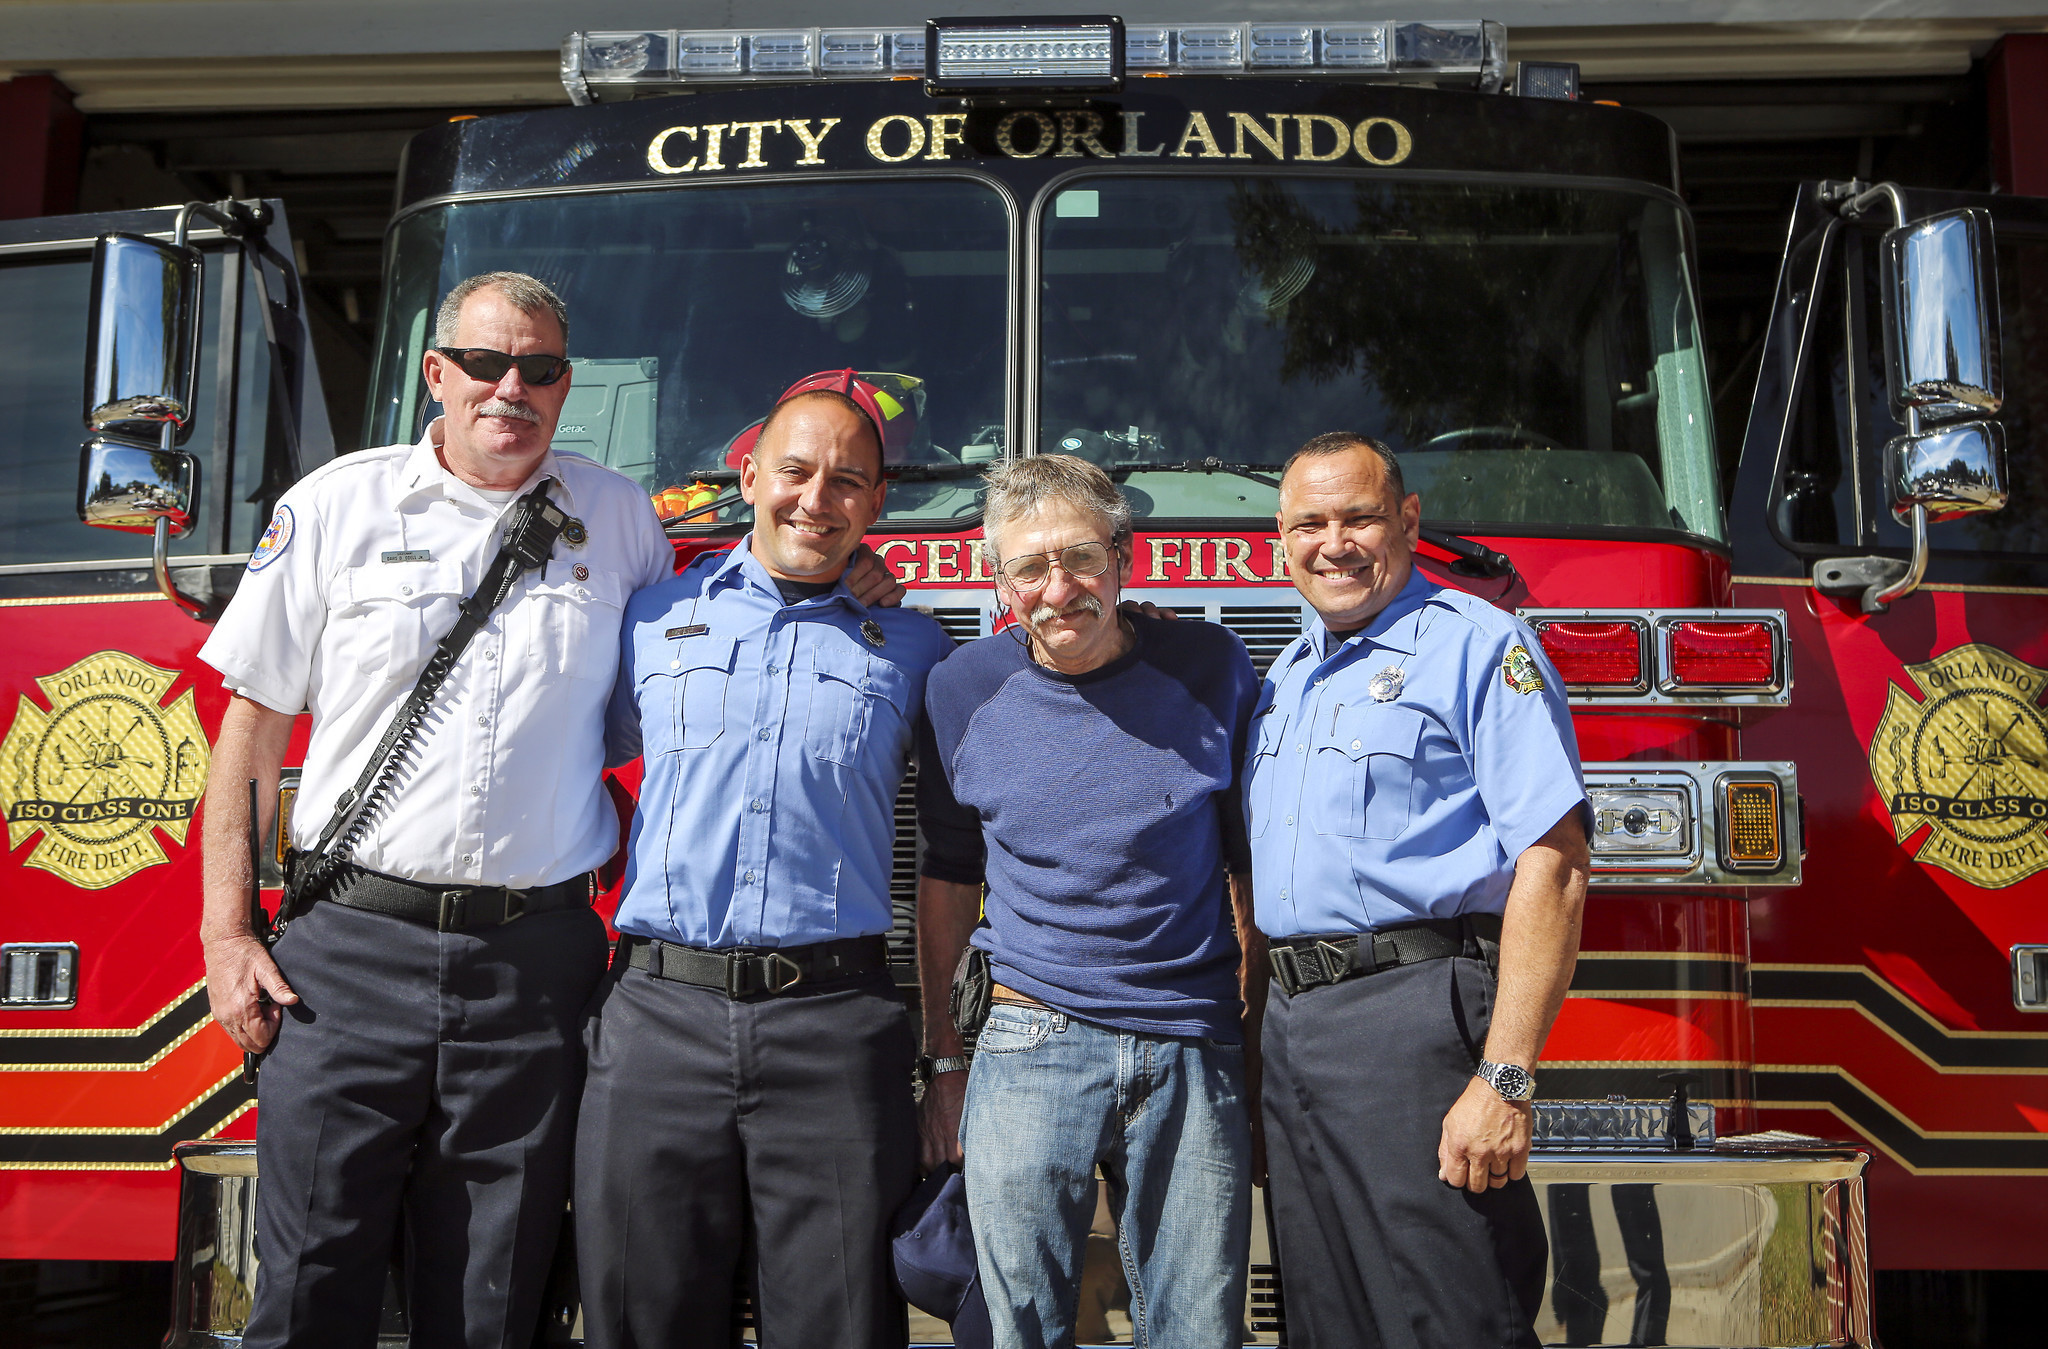 Terminally ill, formerly homeless veteran thanks firefighters who found his family ...2048 x 1349